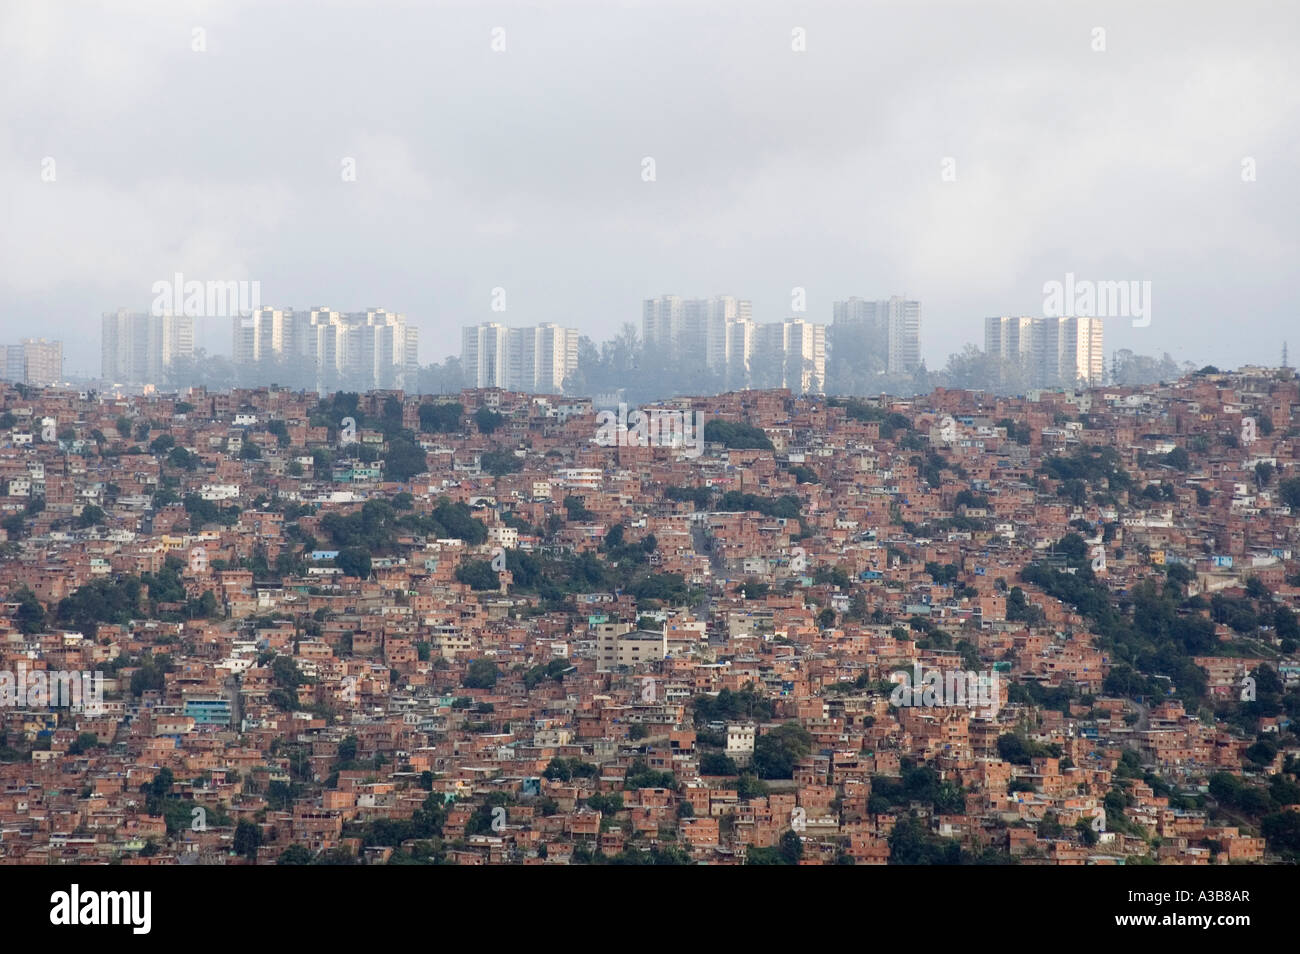 VENEZUELA South America Caracas High rise buildings of capital city shrouded in pollution with slum housing in foreground Stock Photo